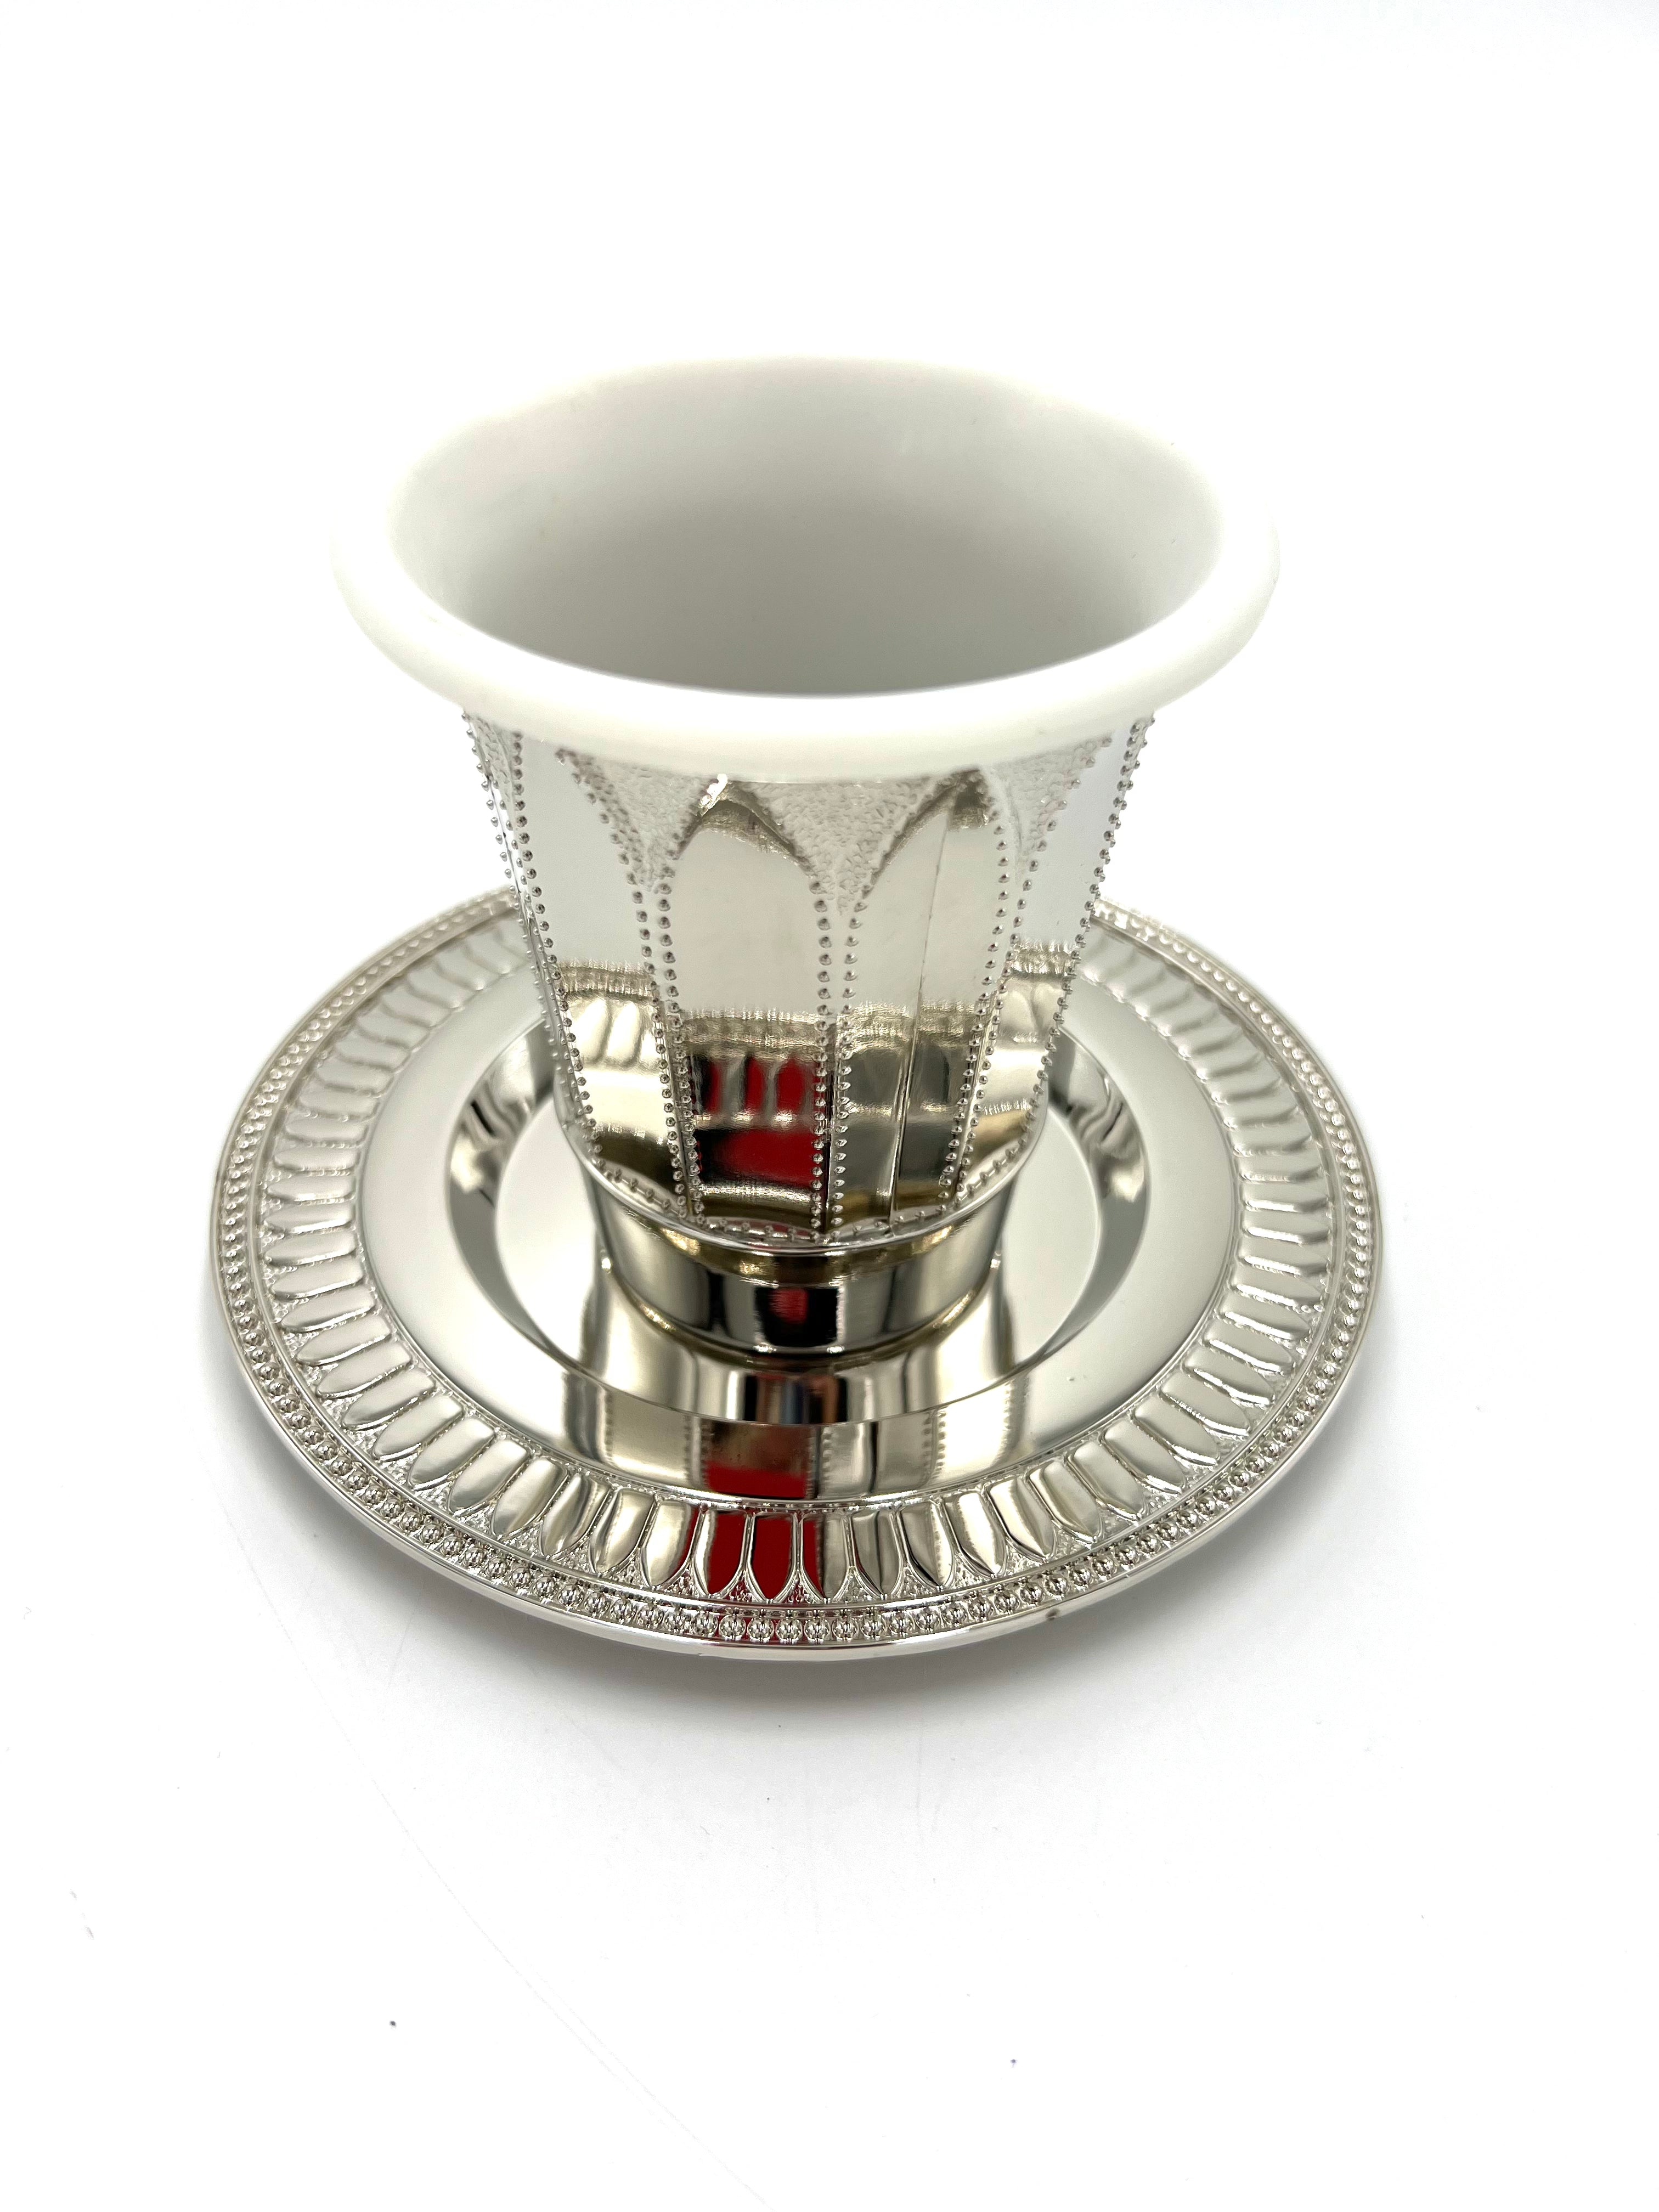 Small kiddush Cup with insert